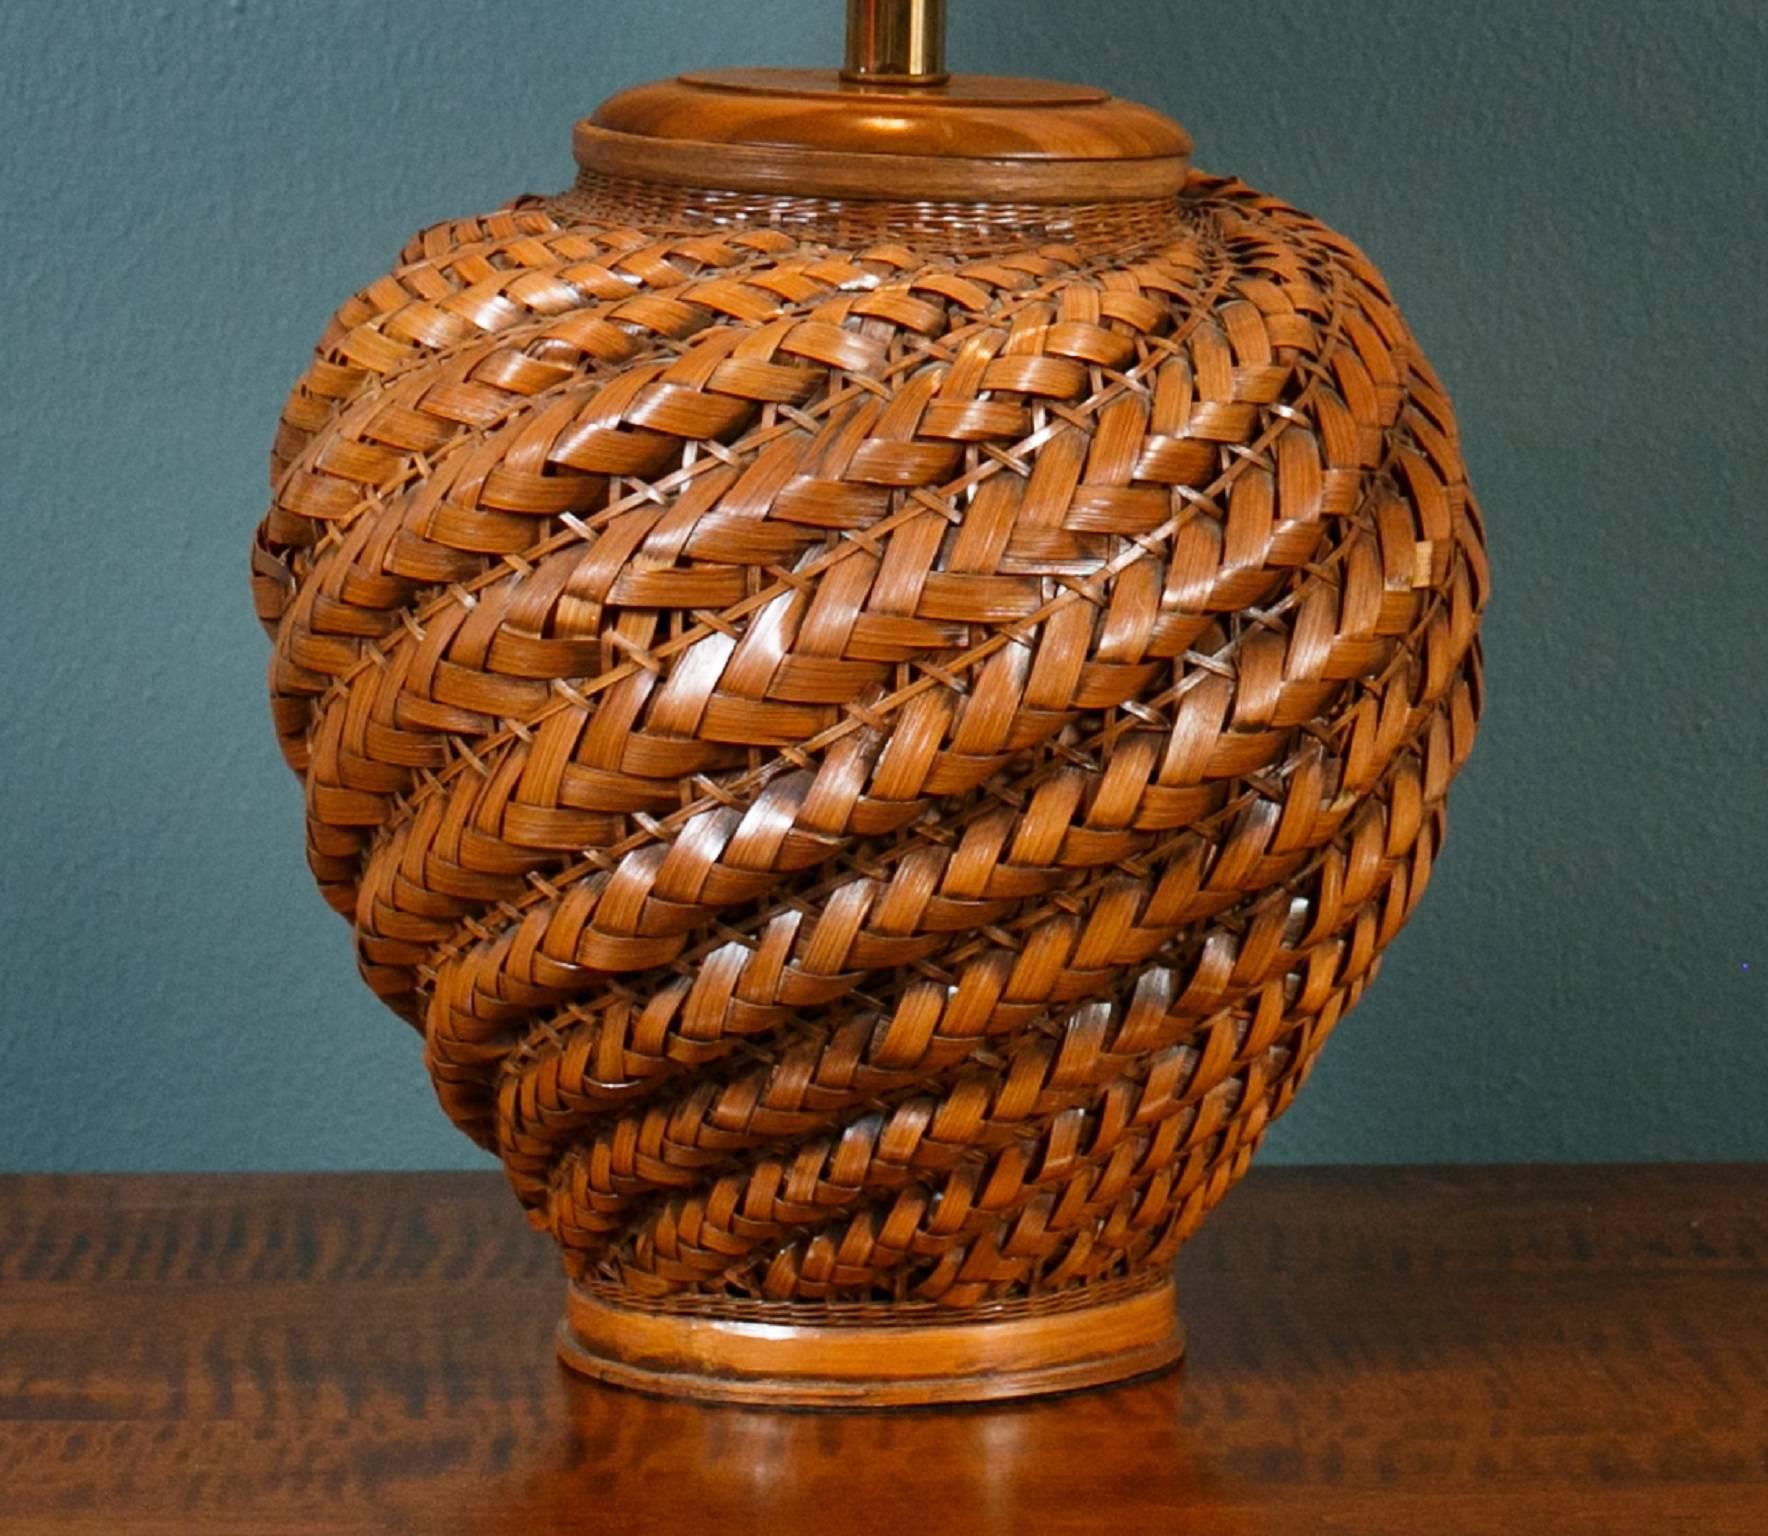 Unusual plaited wicker table lamp with beige cotton shade. Beautiful color and proportion. Measurement is with shade on.